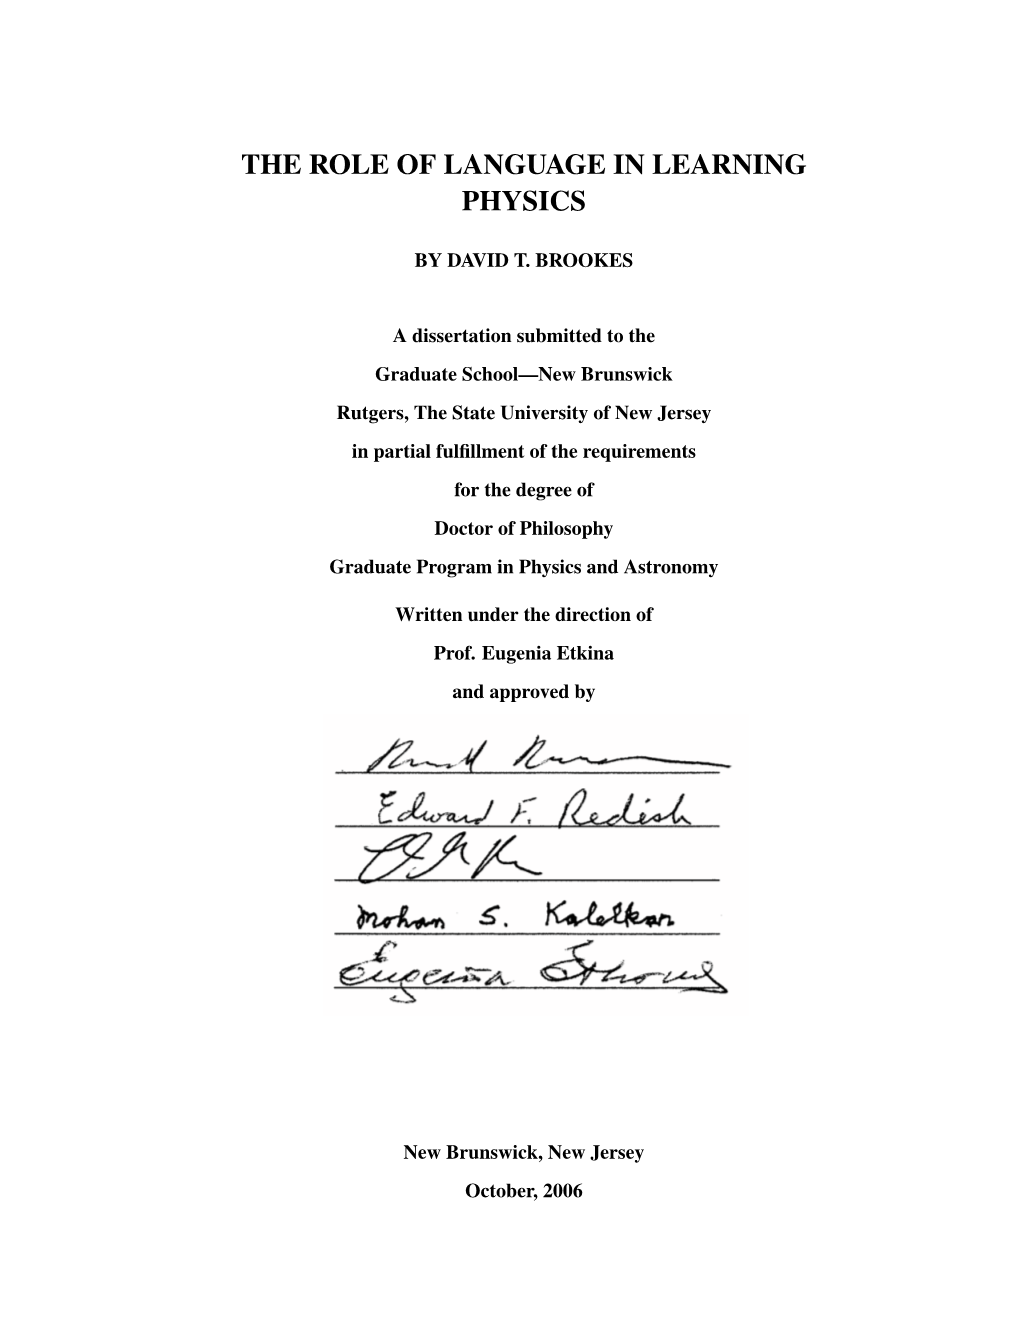 The Role of Language in Learning Physics